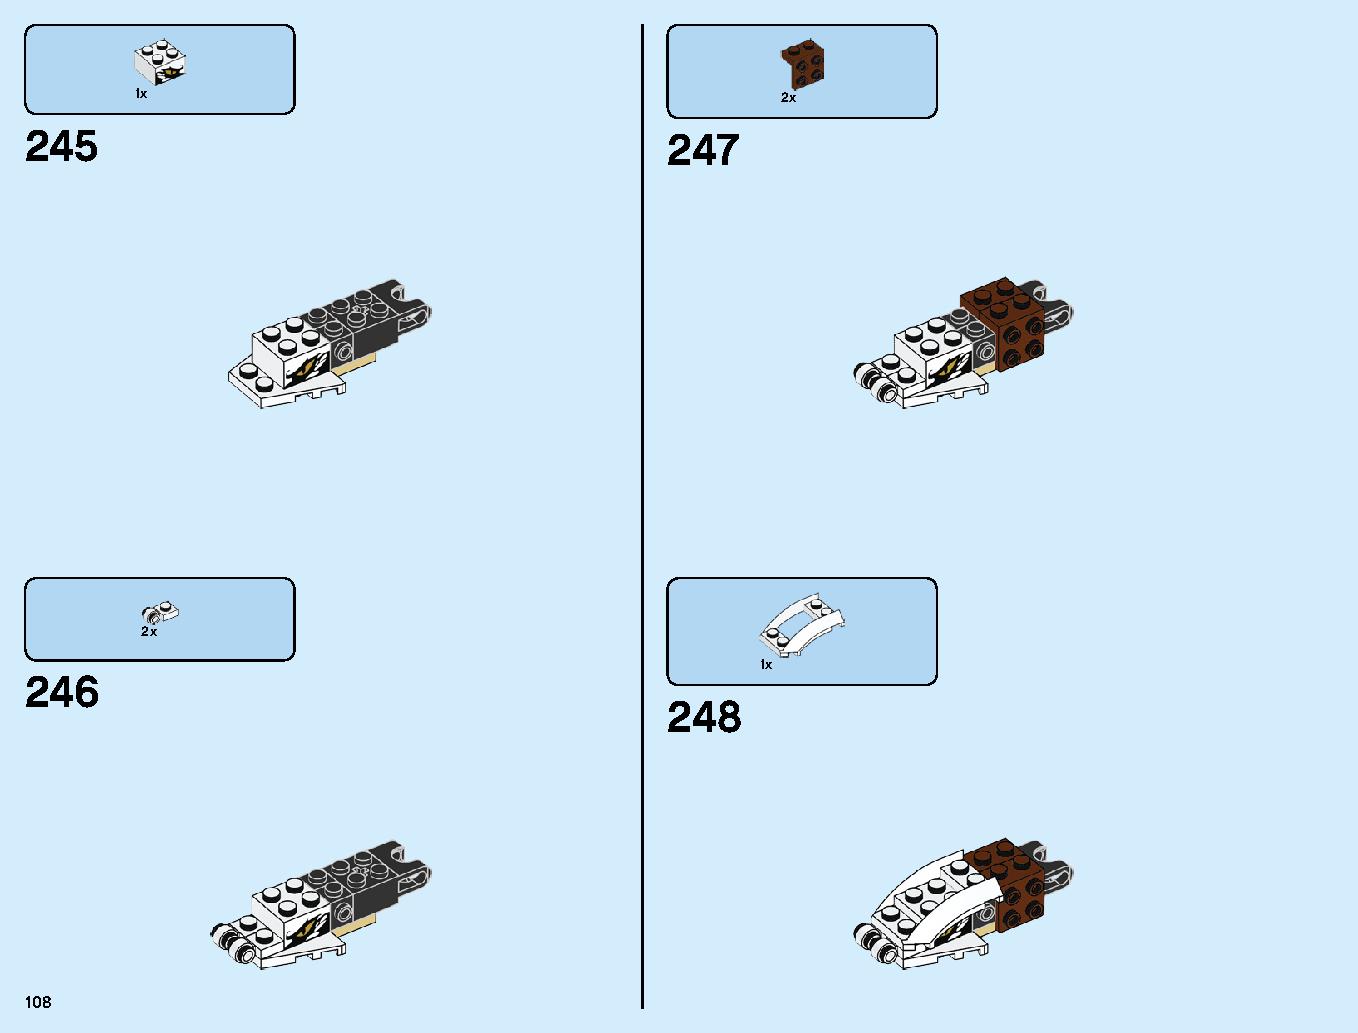 The Ultra Dragon 70679 LEGO information LEGO instructions 108 page